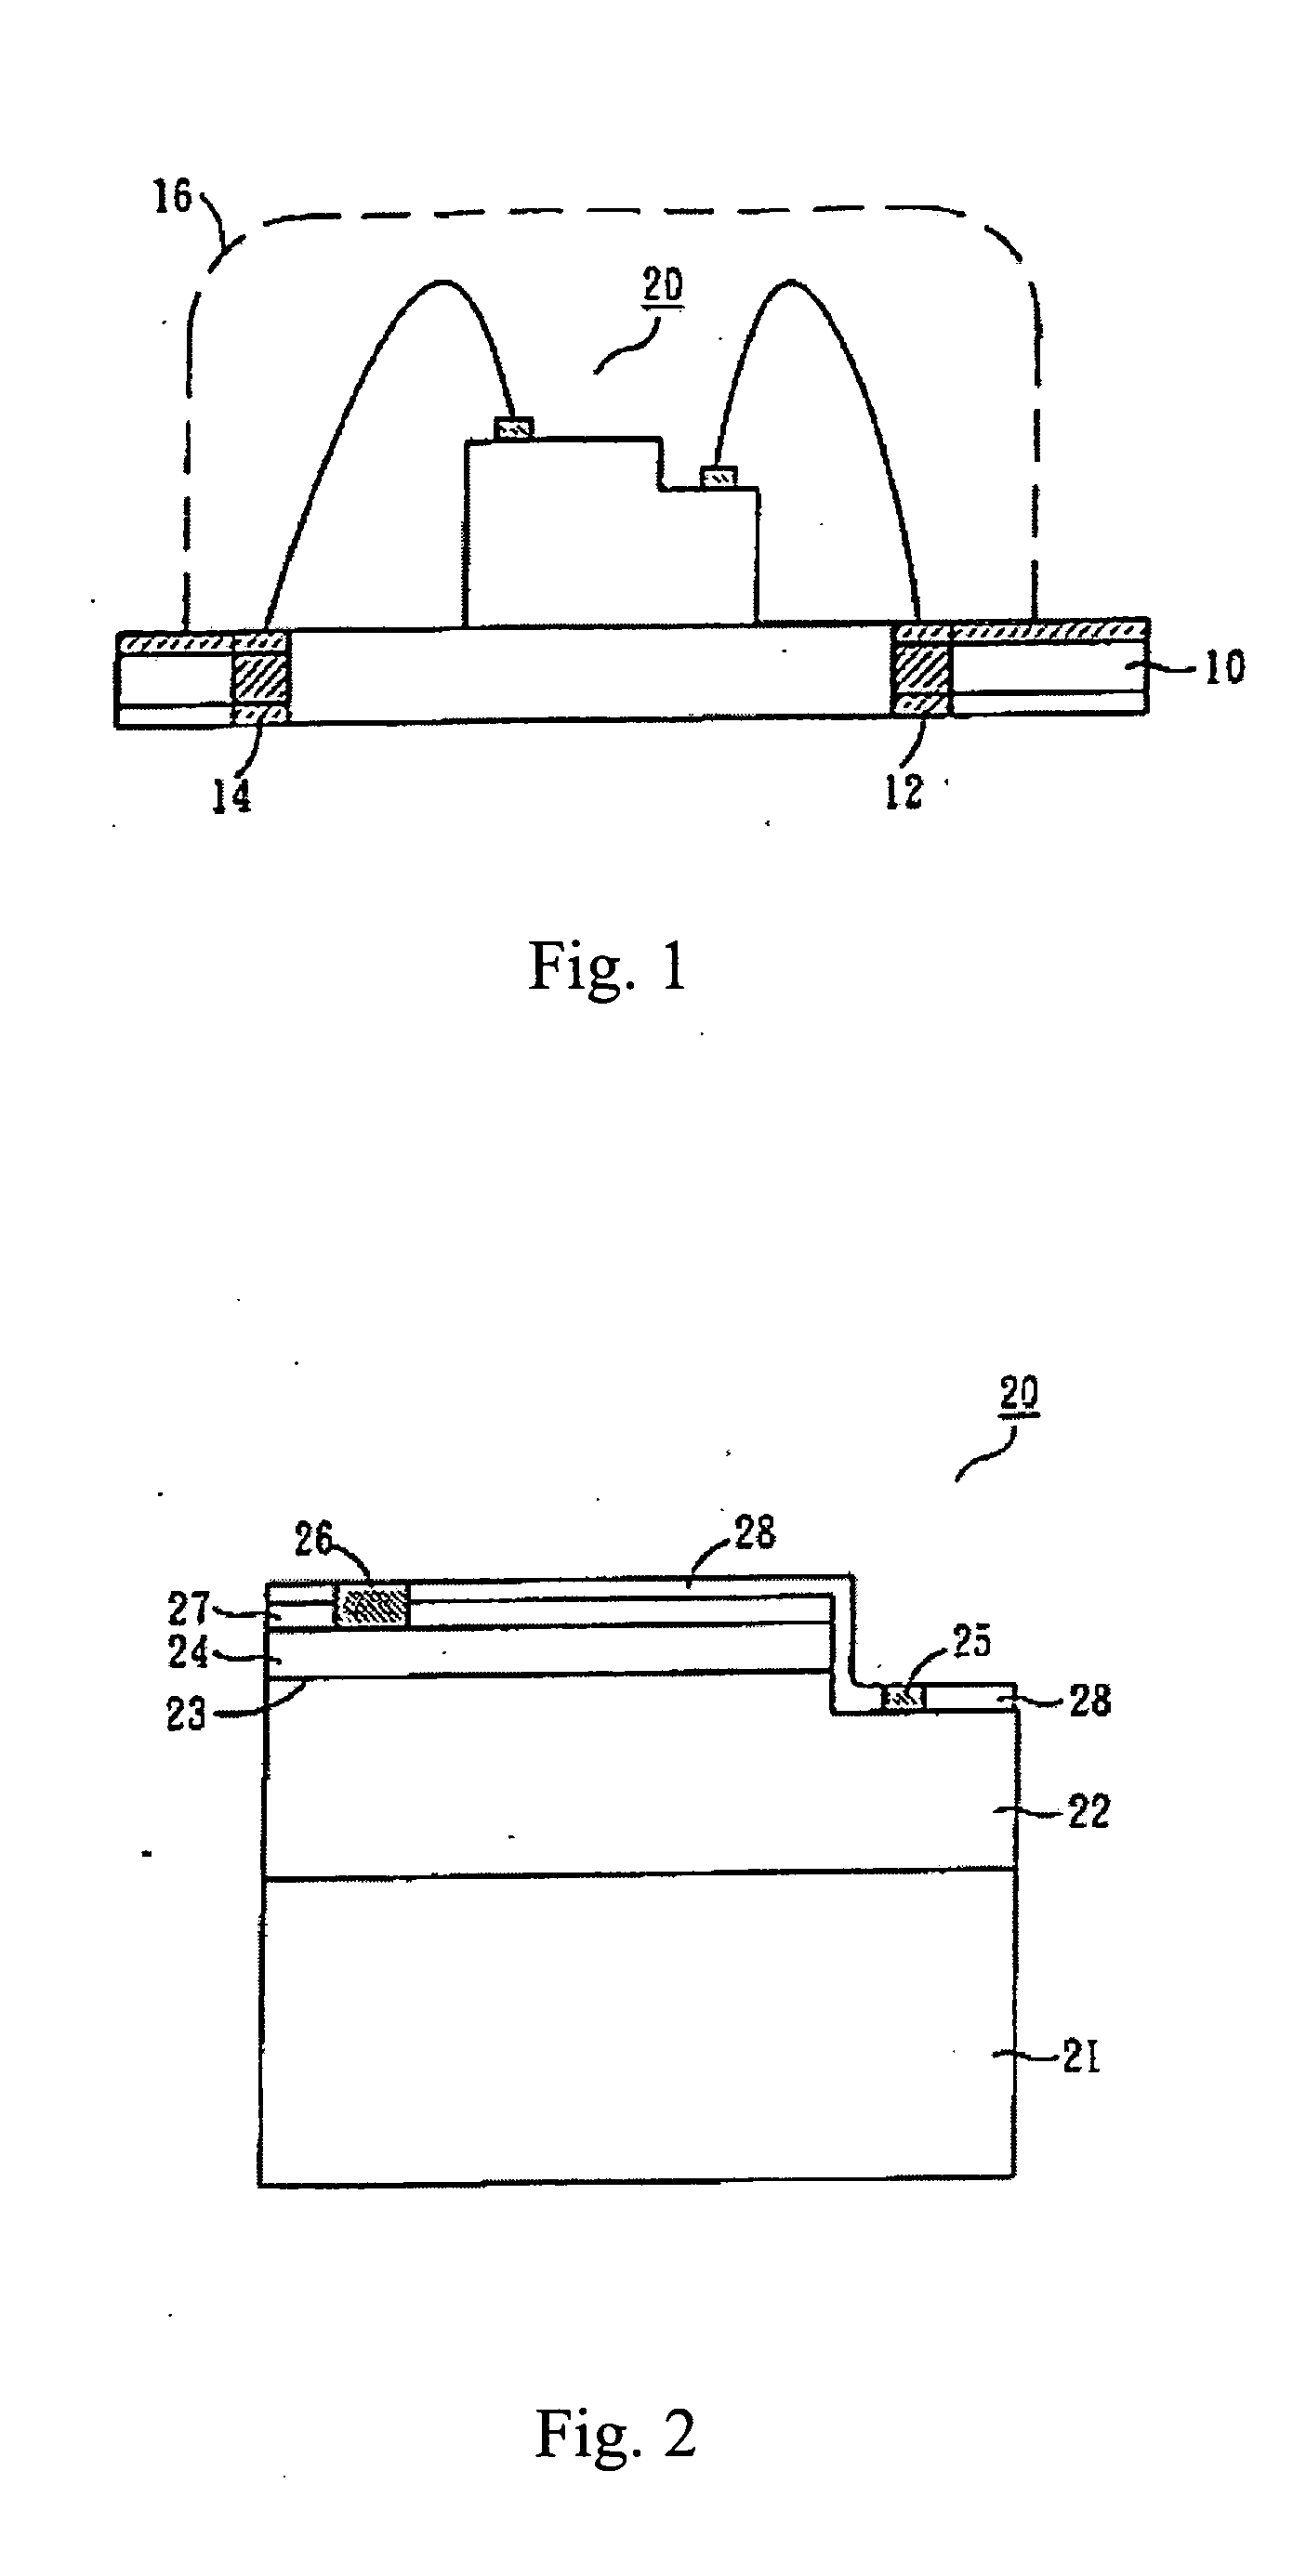 LED structure for flip-chip package and method thereof